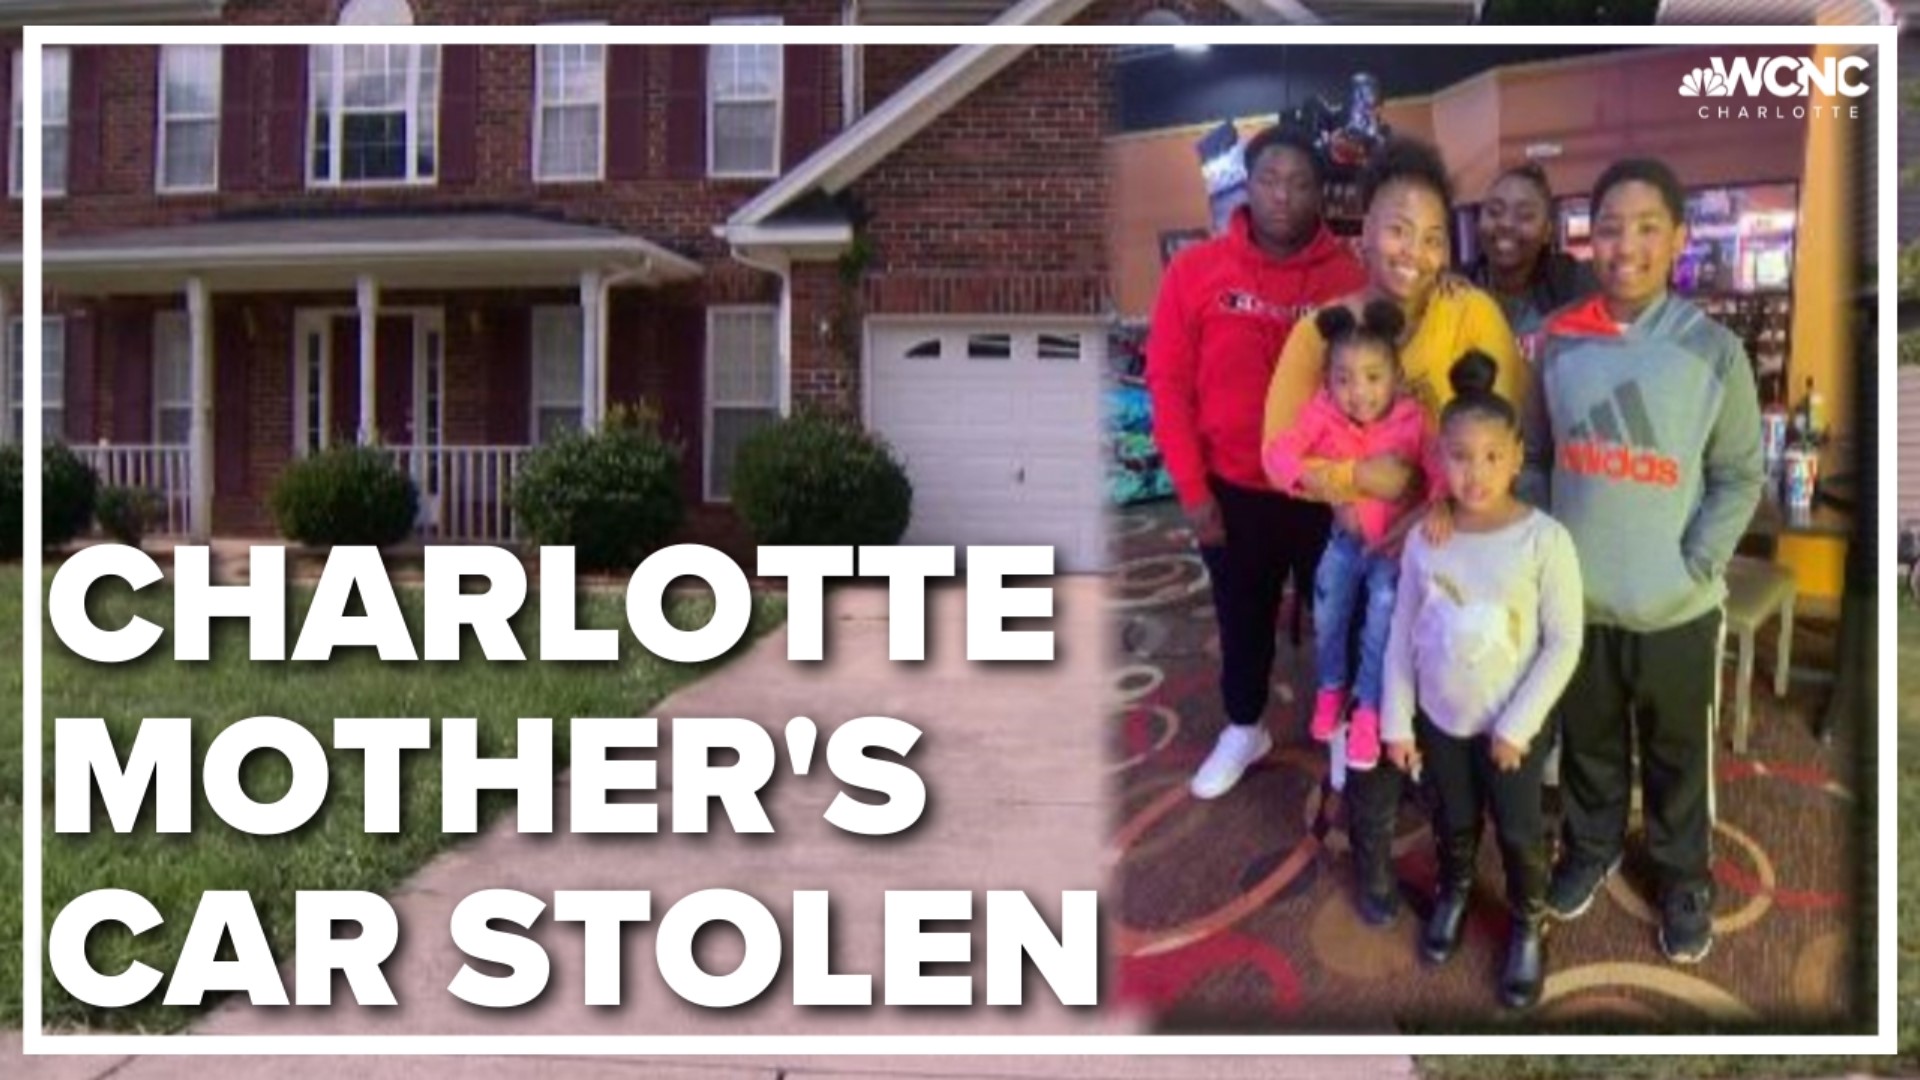 She said thieves stole her car, leaving her no means to make it back and forth to the hospital where her daughter is battling a serious and rare form of leukemia.